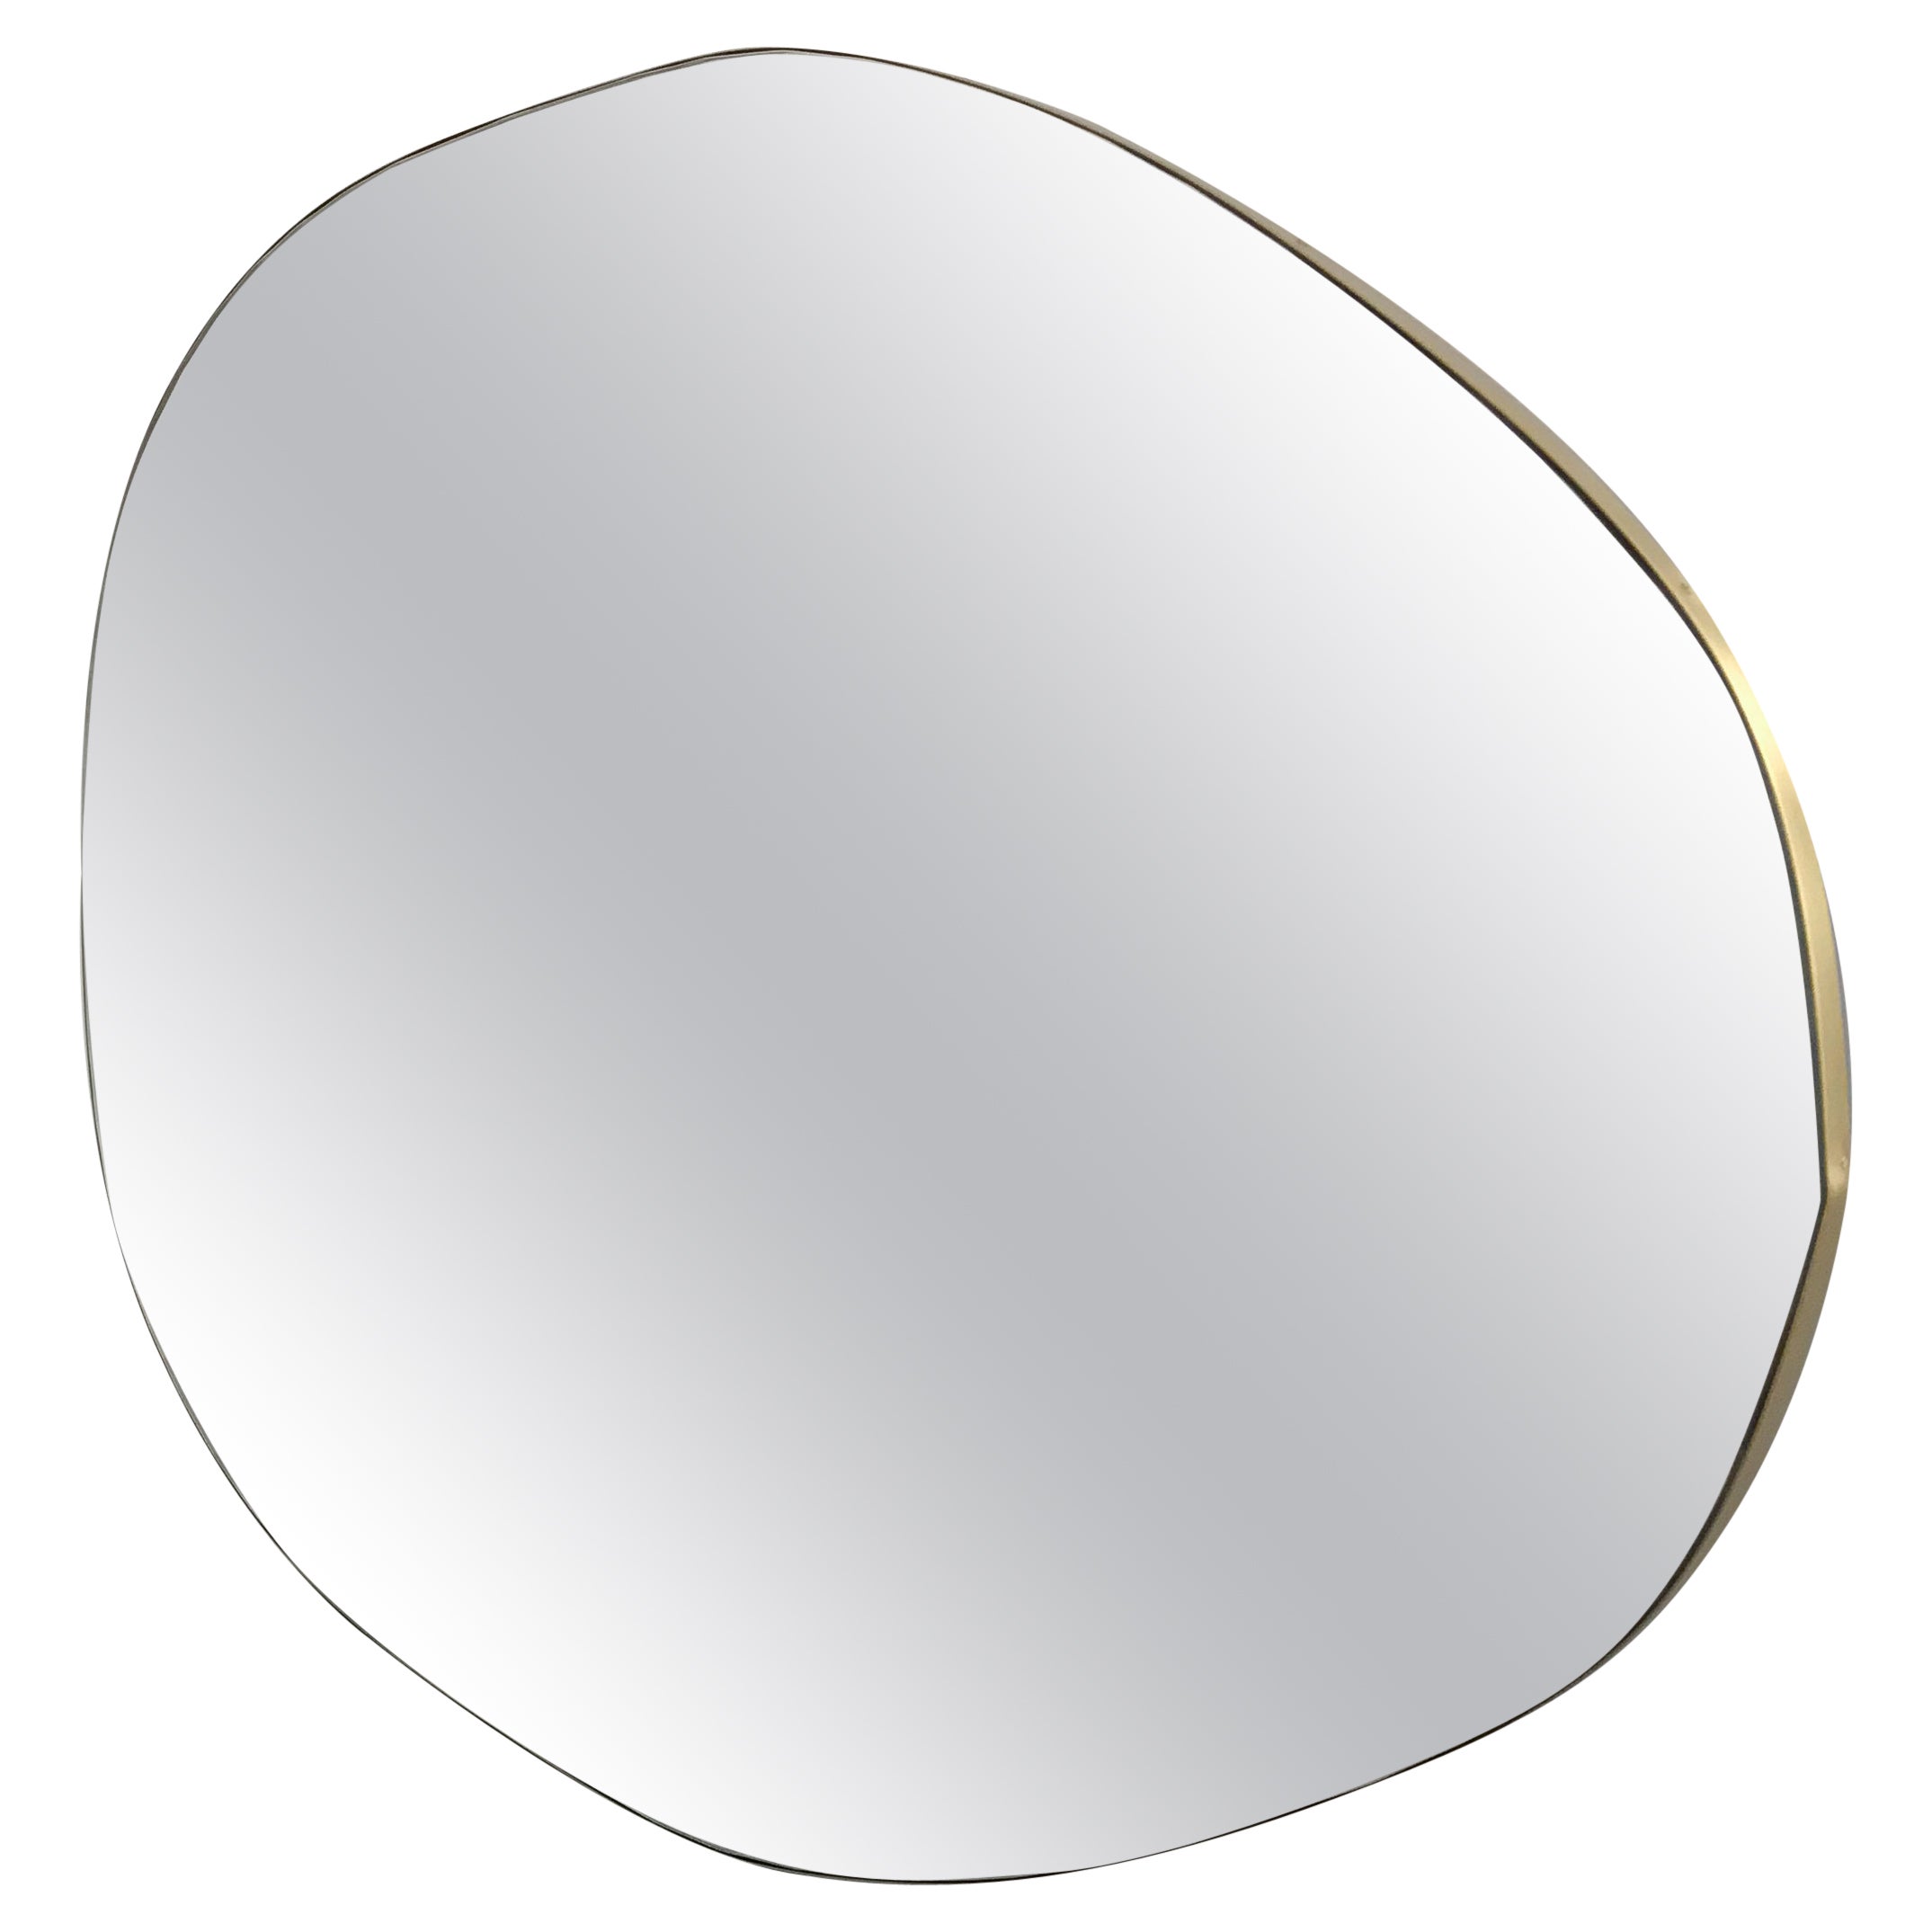 Bespoke mirror for Rachel Nuva Organic Shaped  with Brass Frame, Oversized For Sale